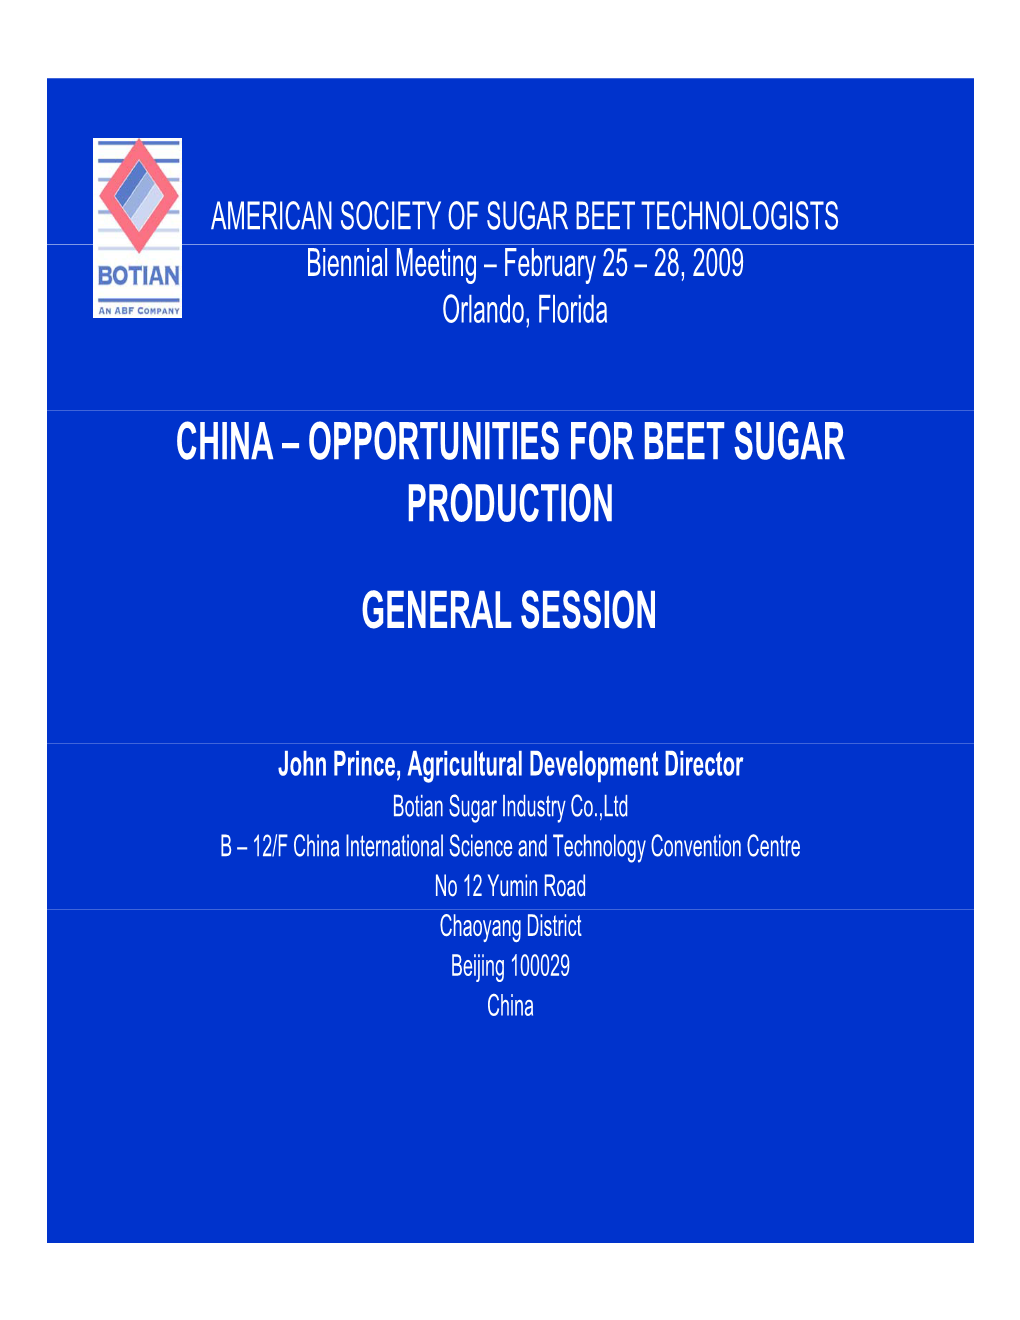 China – Opportunities for Beet Sugar Production